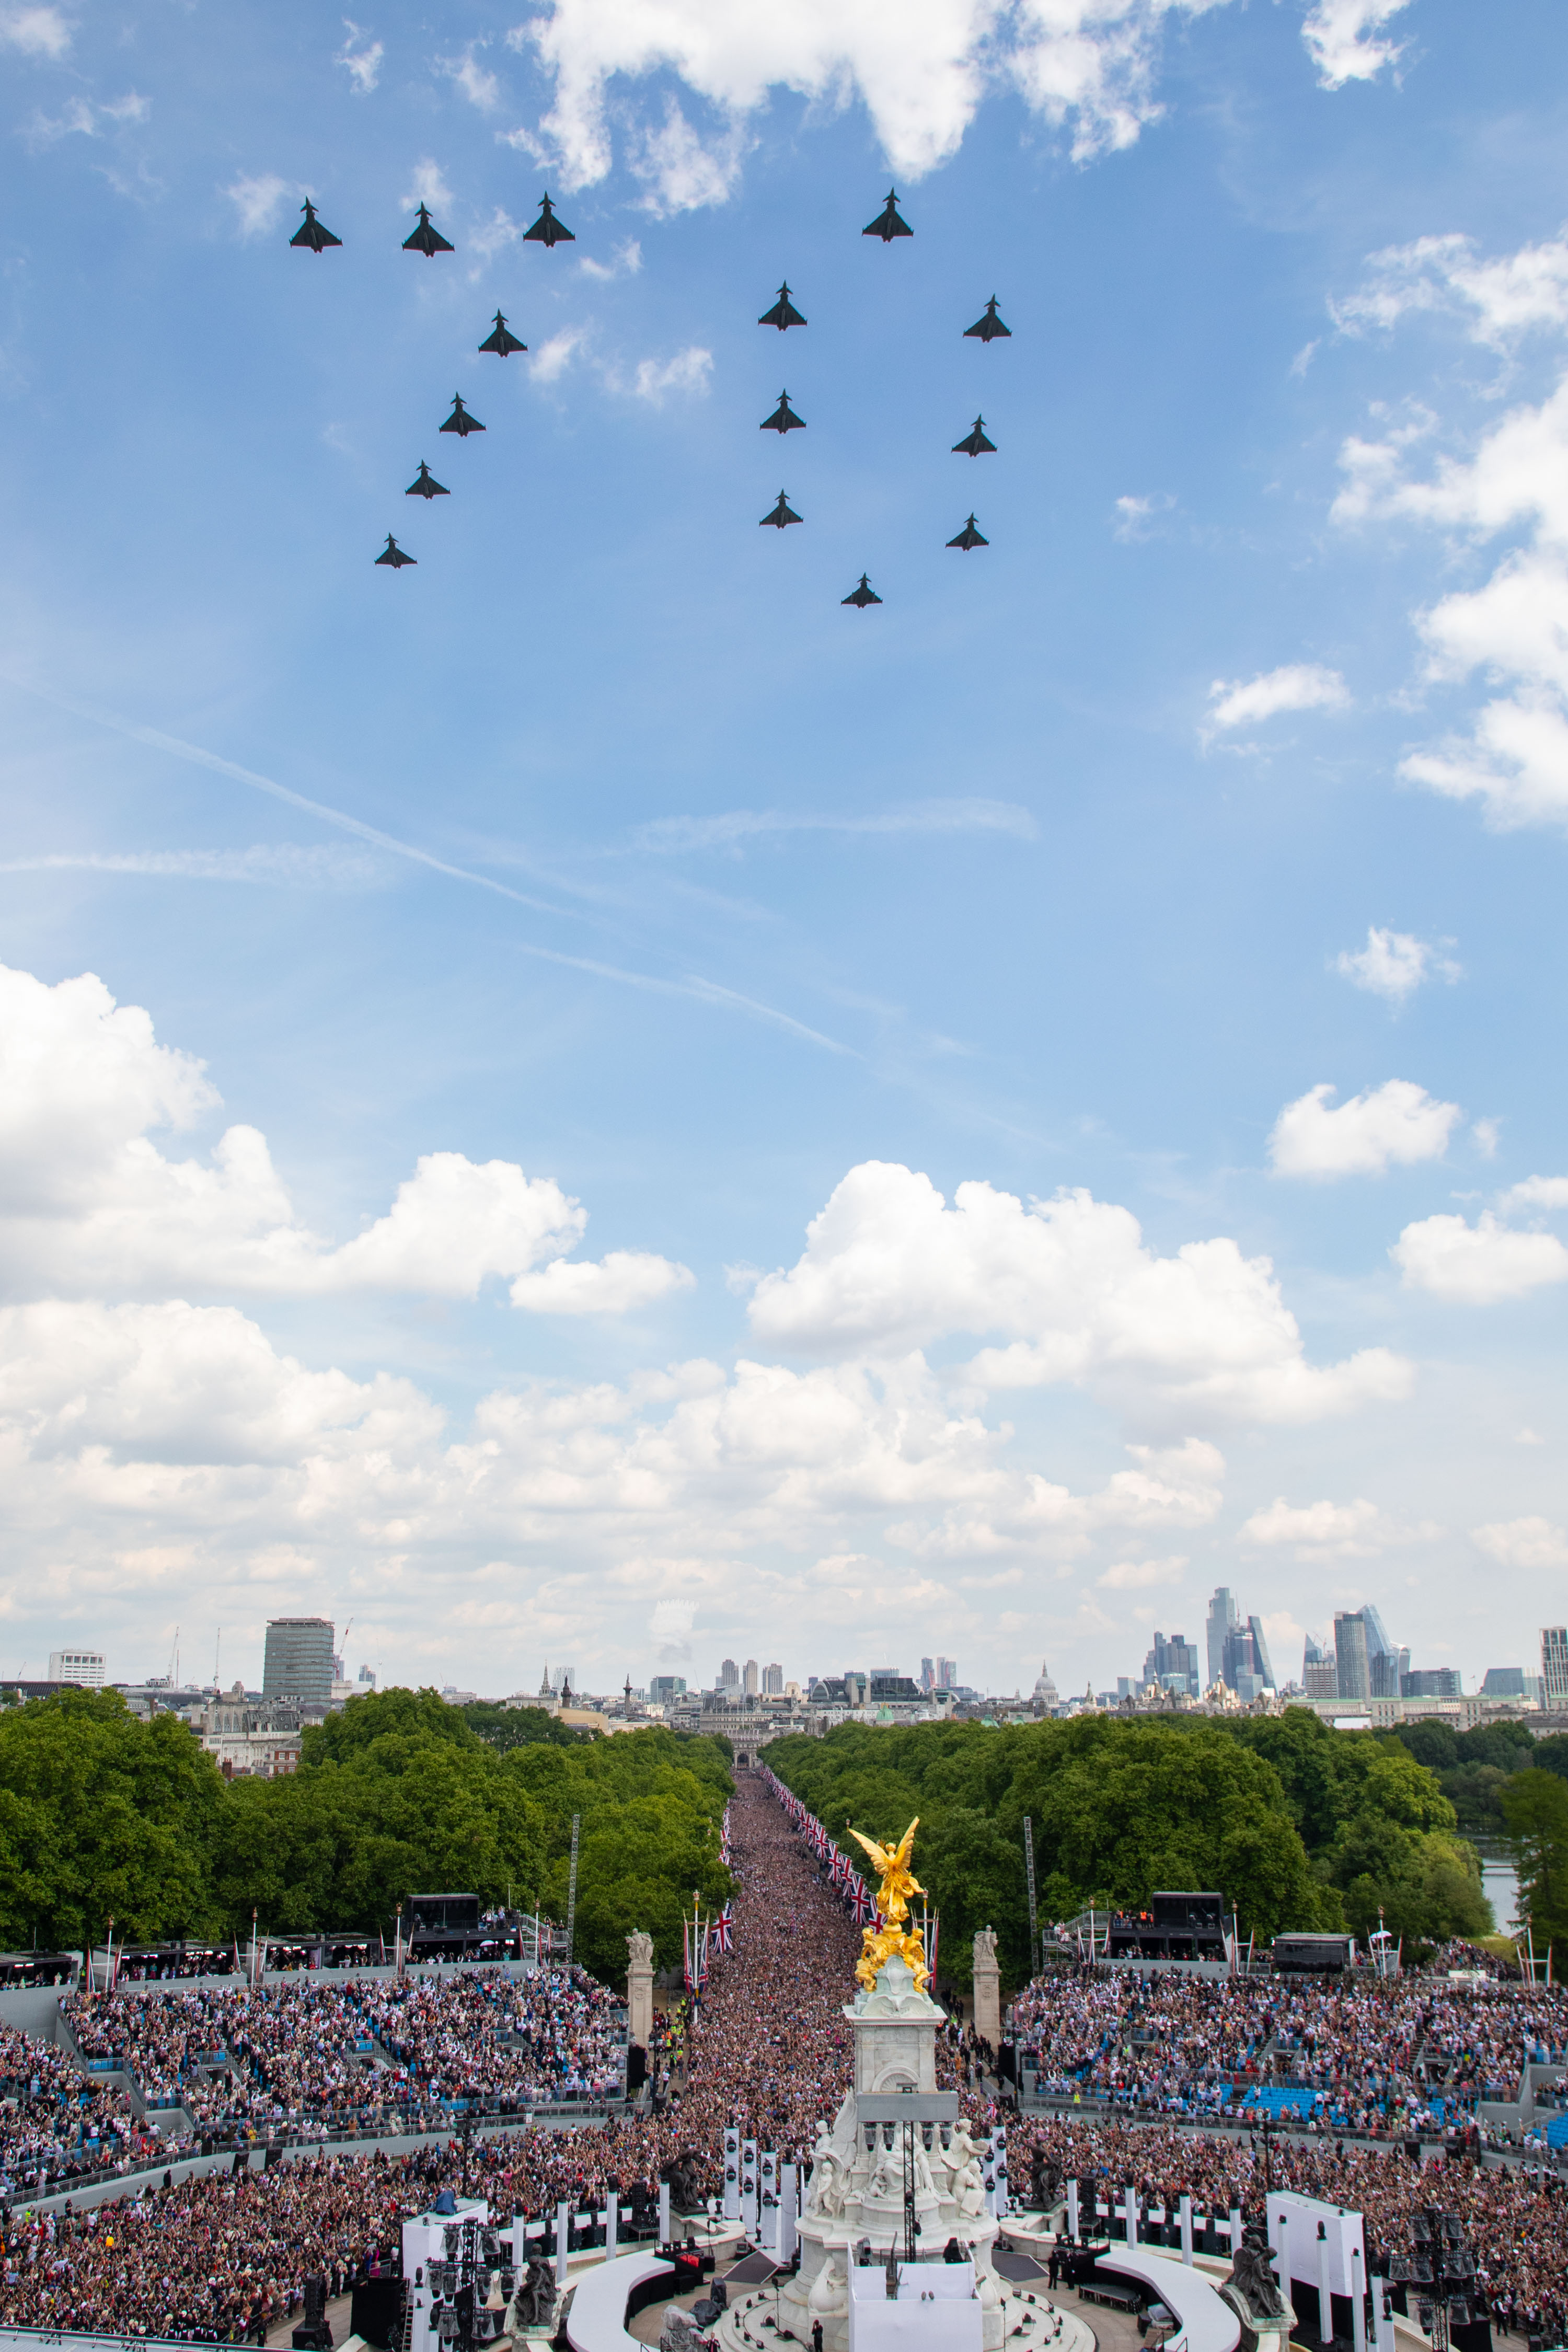 Typhoon flypast in 70 formation over The Mall and crowd.